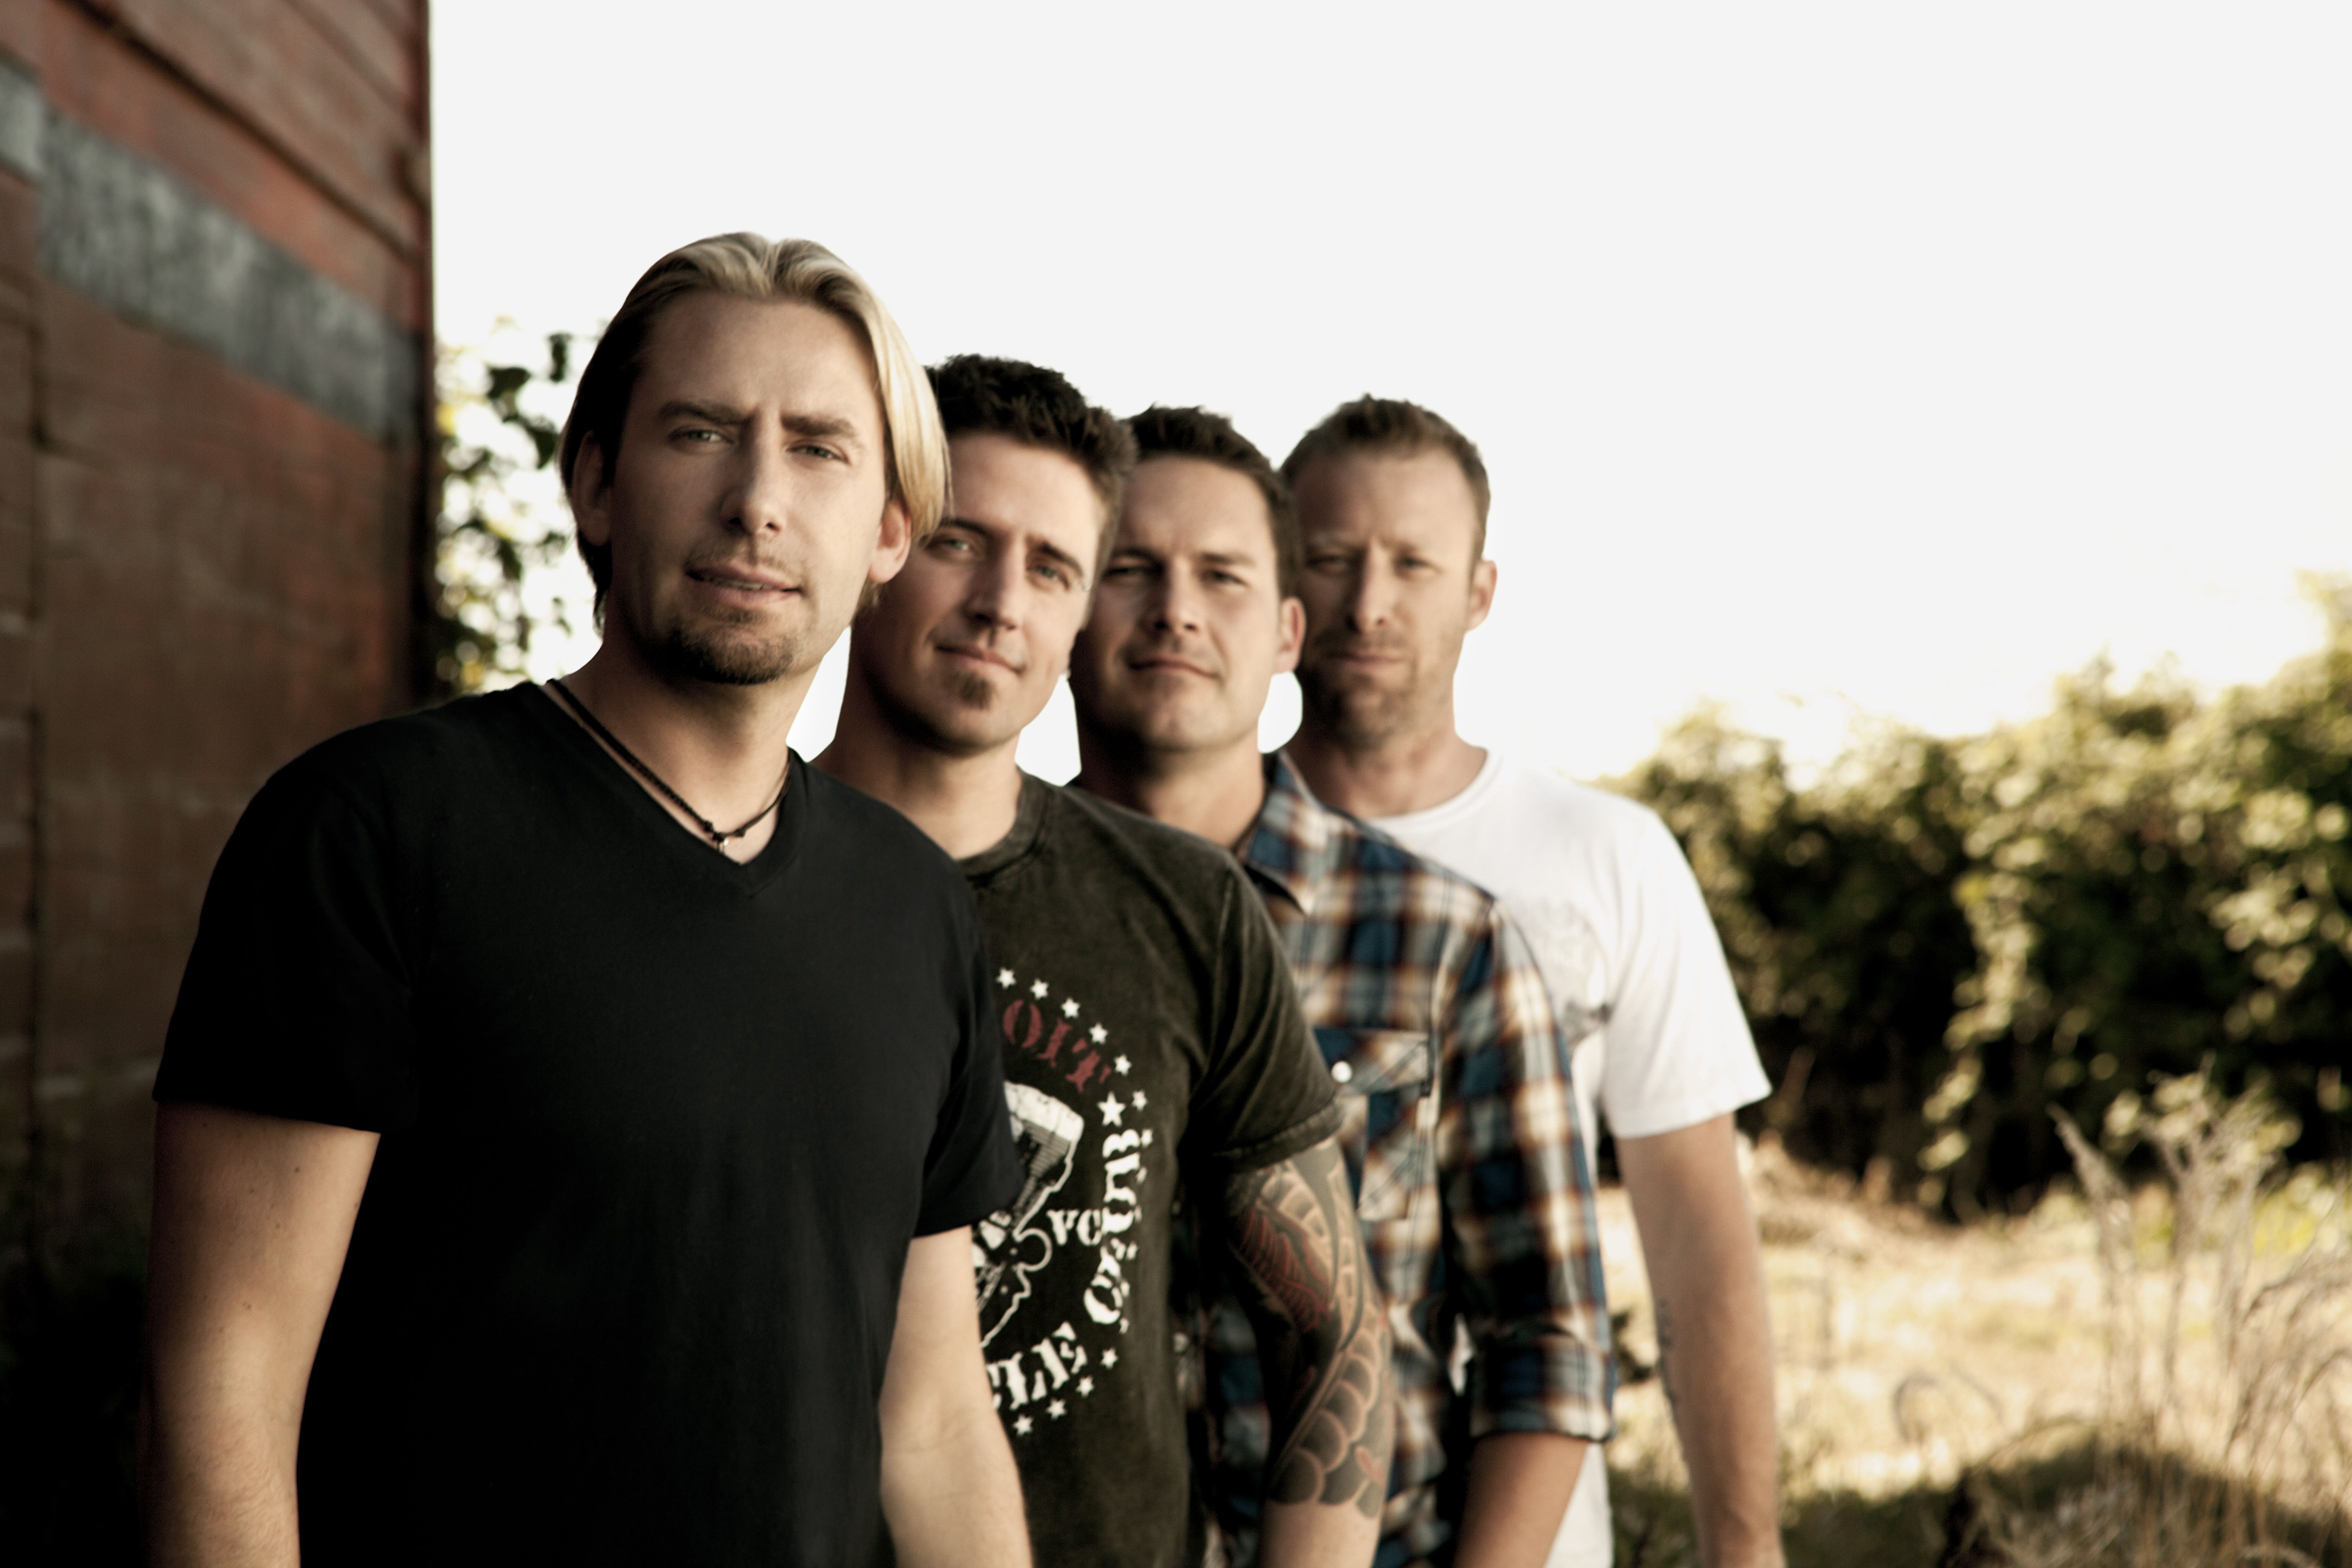 Rock band Nickelback wallpapers and images - wallpapers, pictures ...